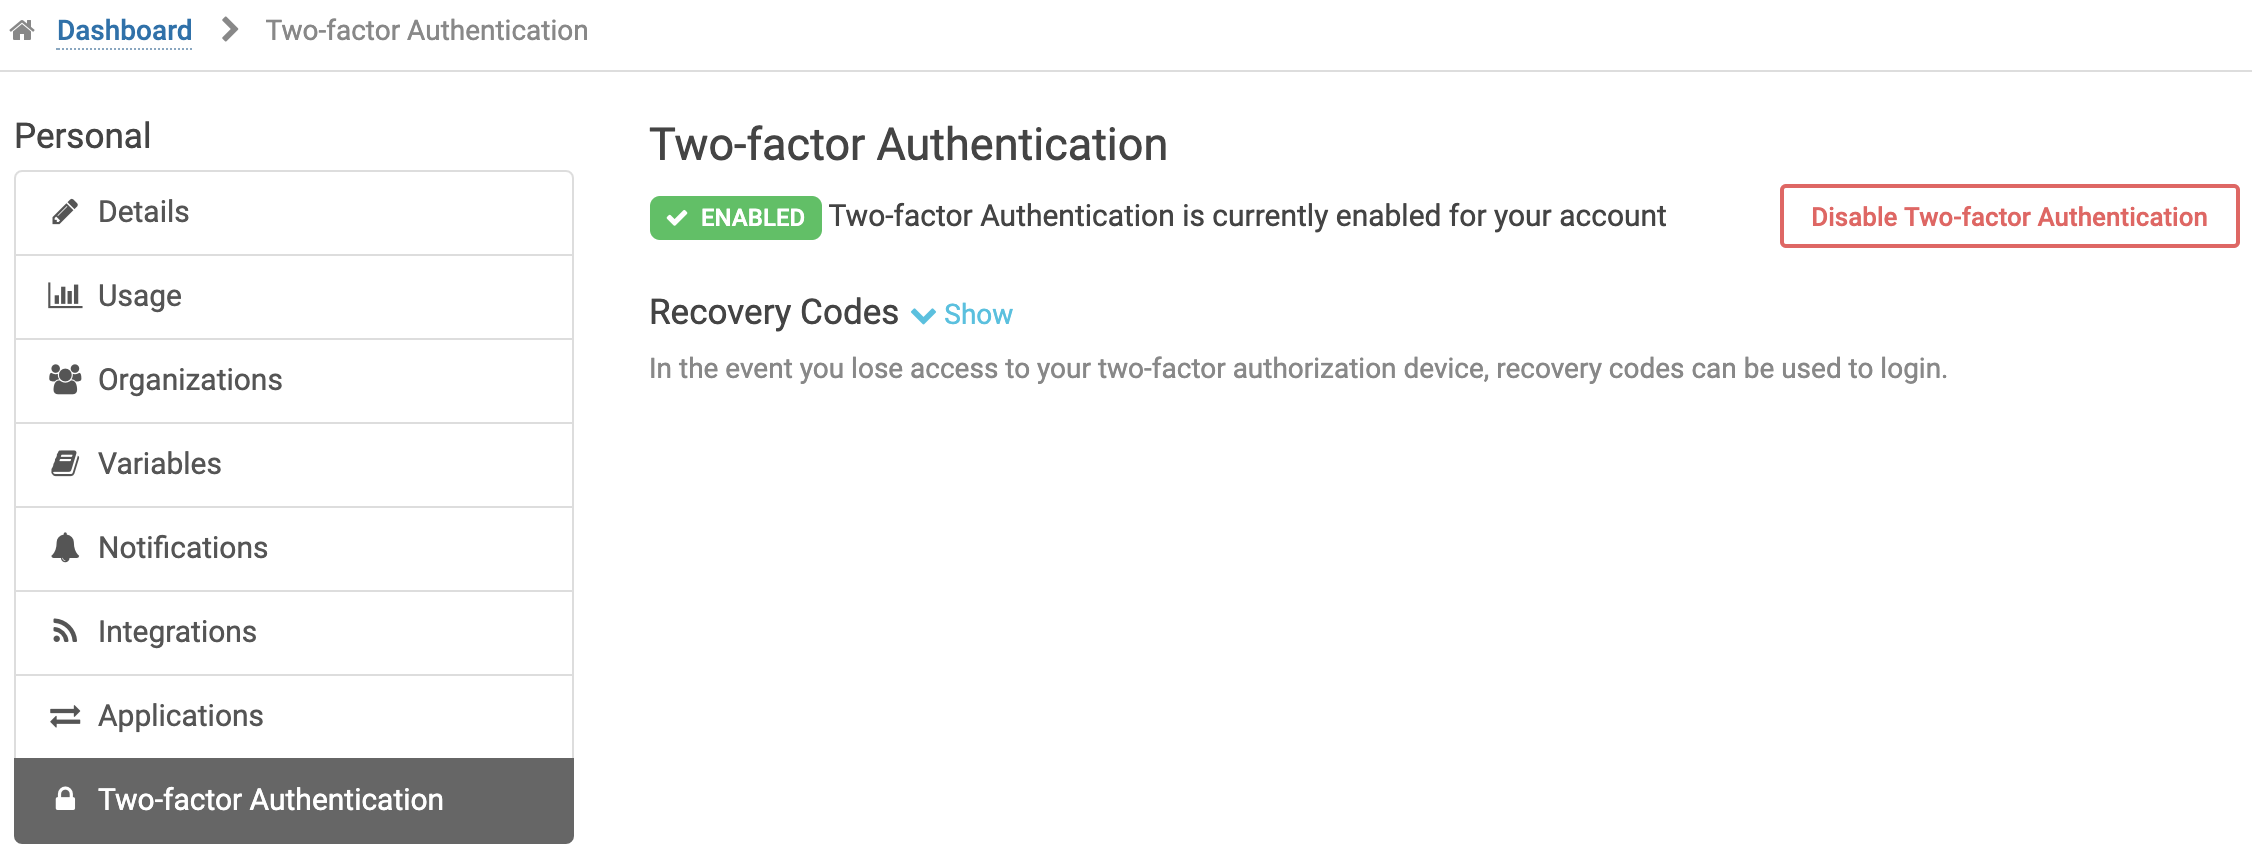 Two-factor Authentication settings when enabled